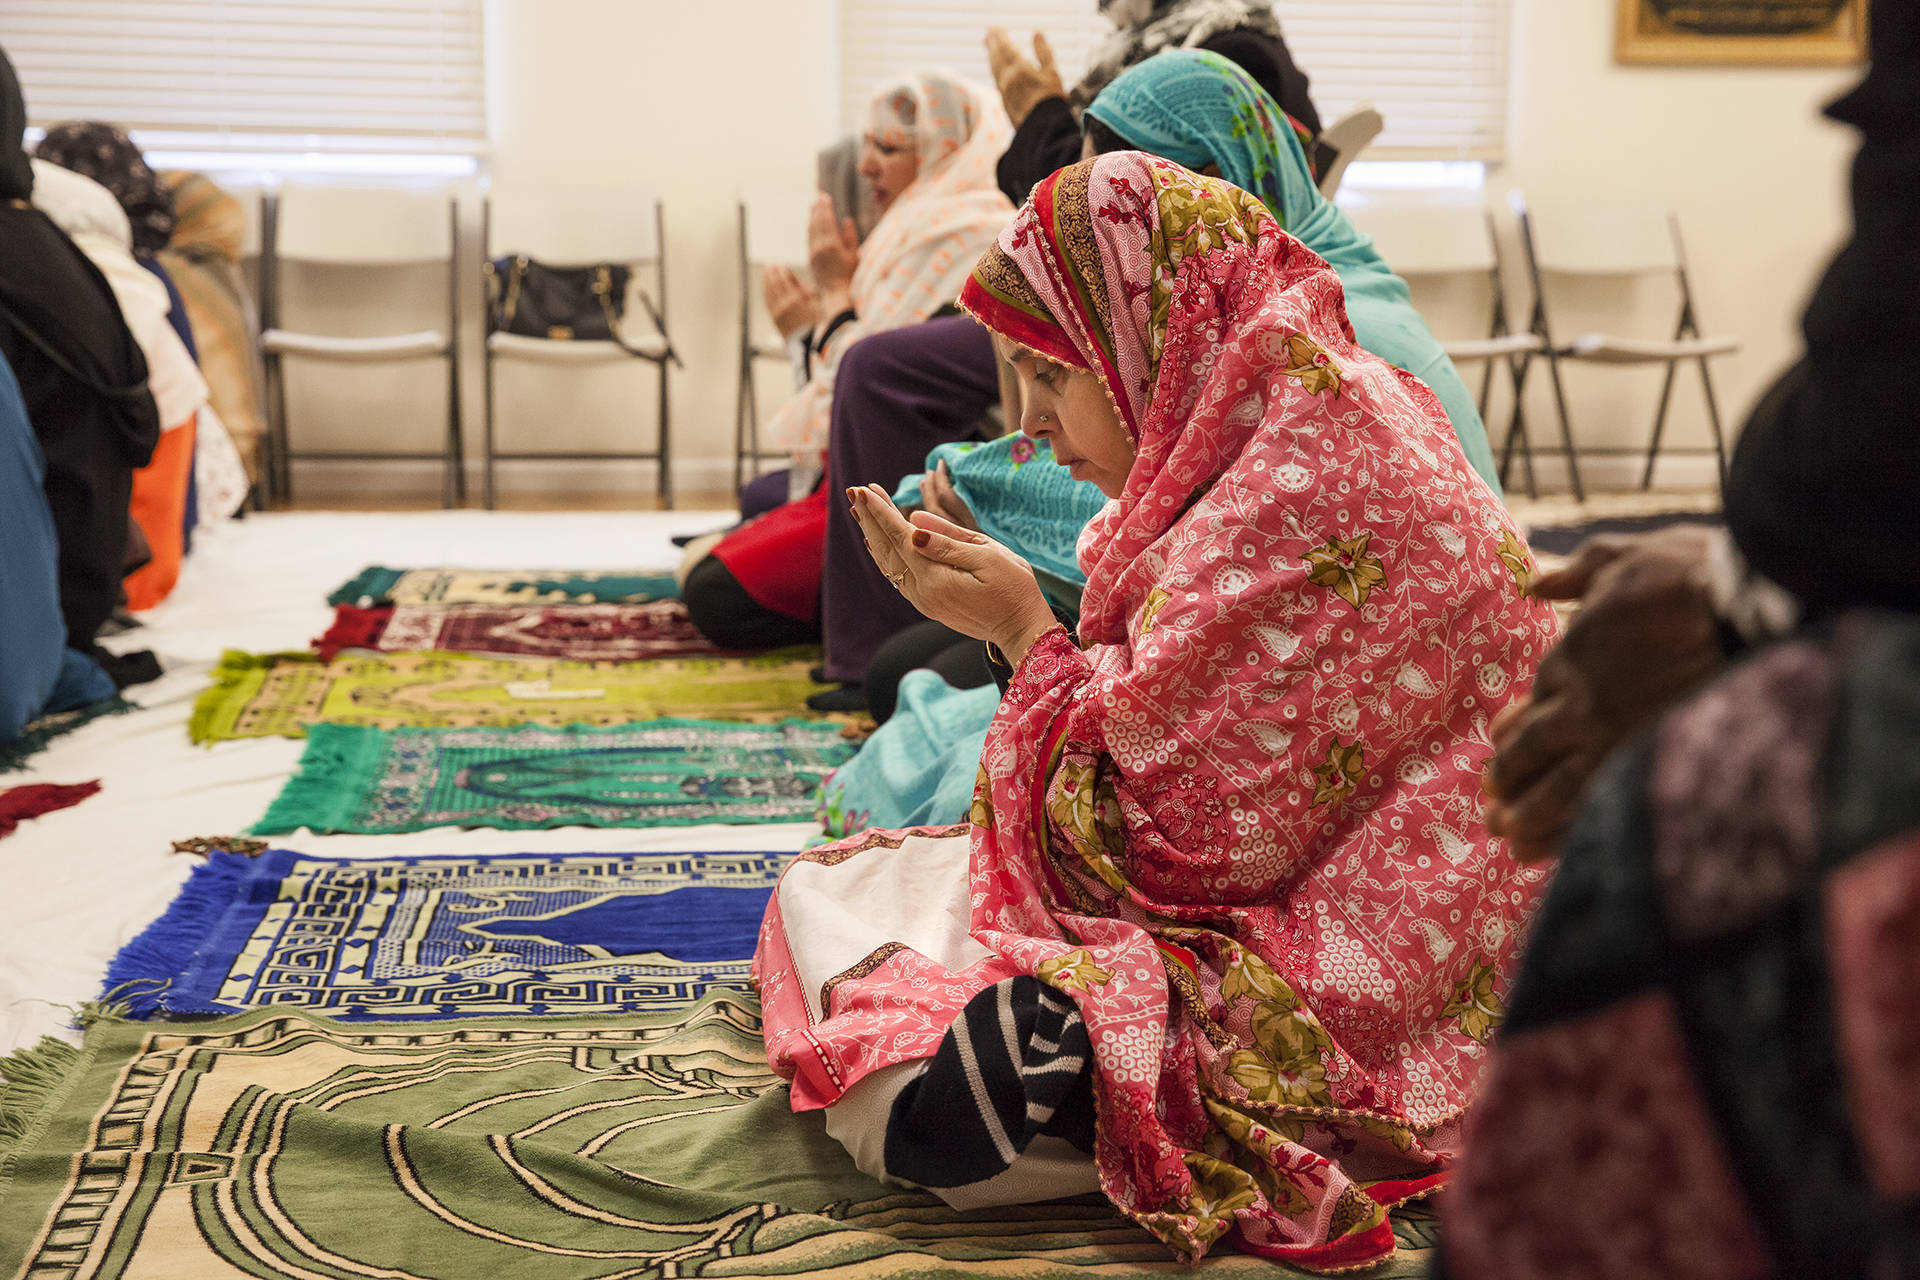 Attendance at the Islamic Center of East Bay has continued to grow. Brittany Hosea-Small /KQED